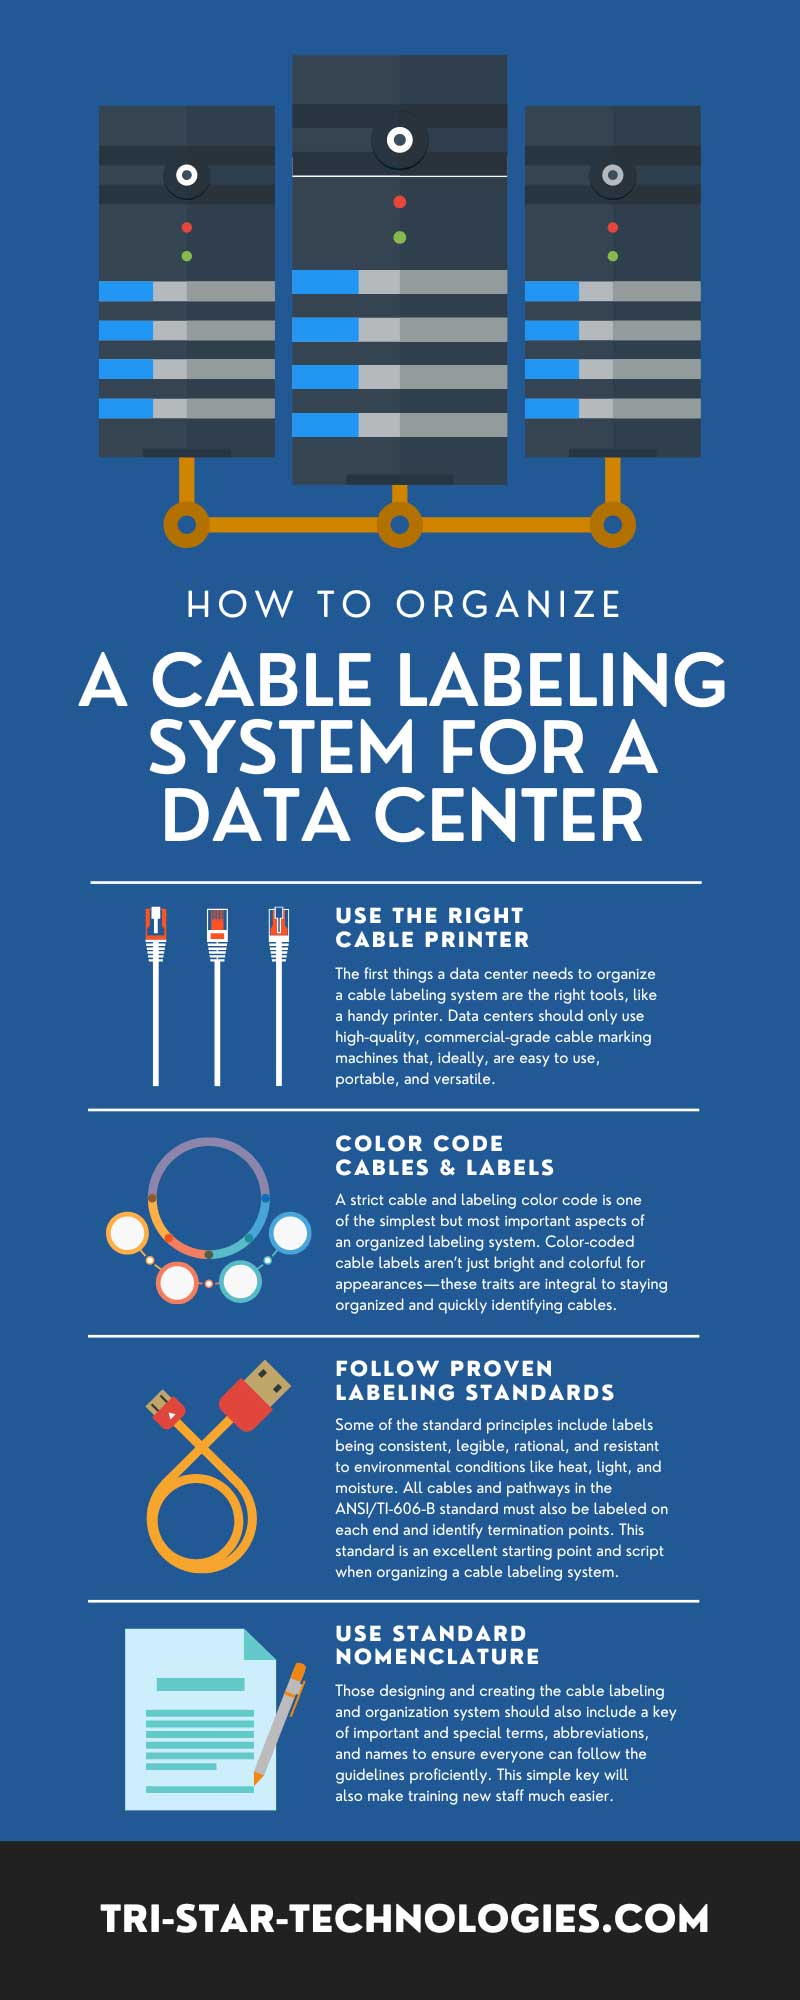 How To Organize a Cable Labeling System for a Data Center